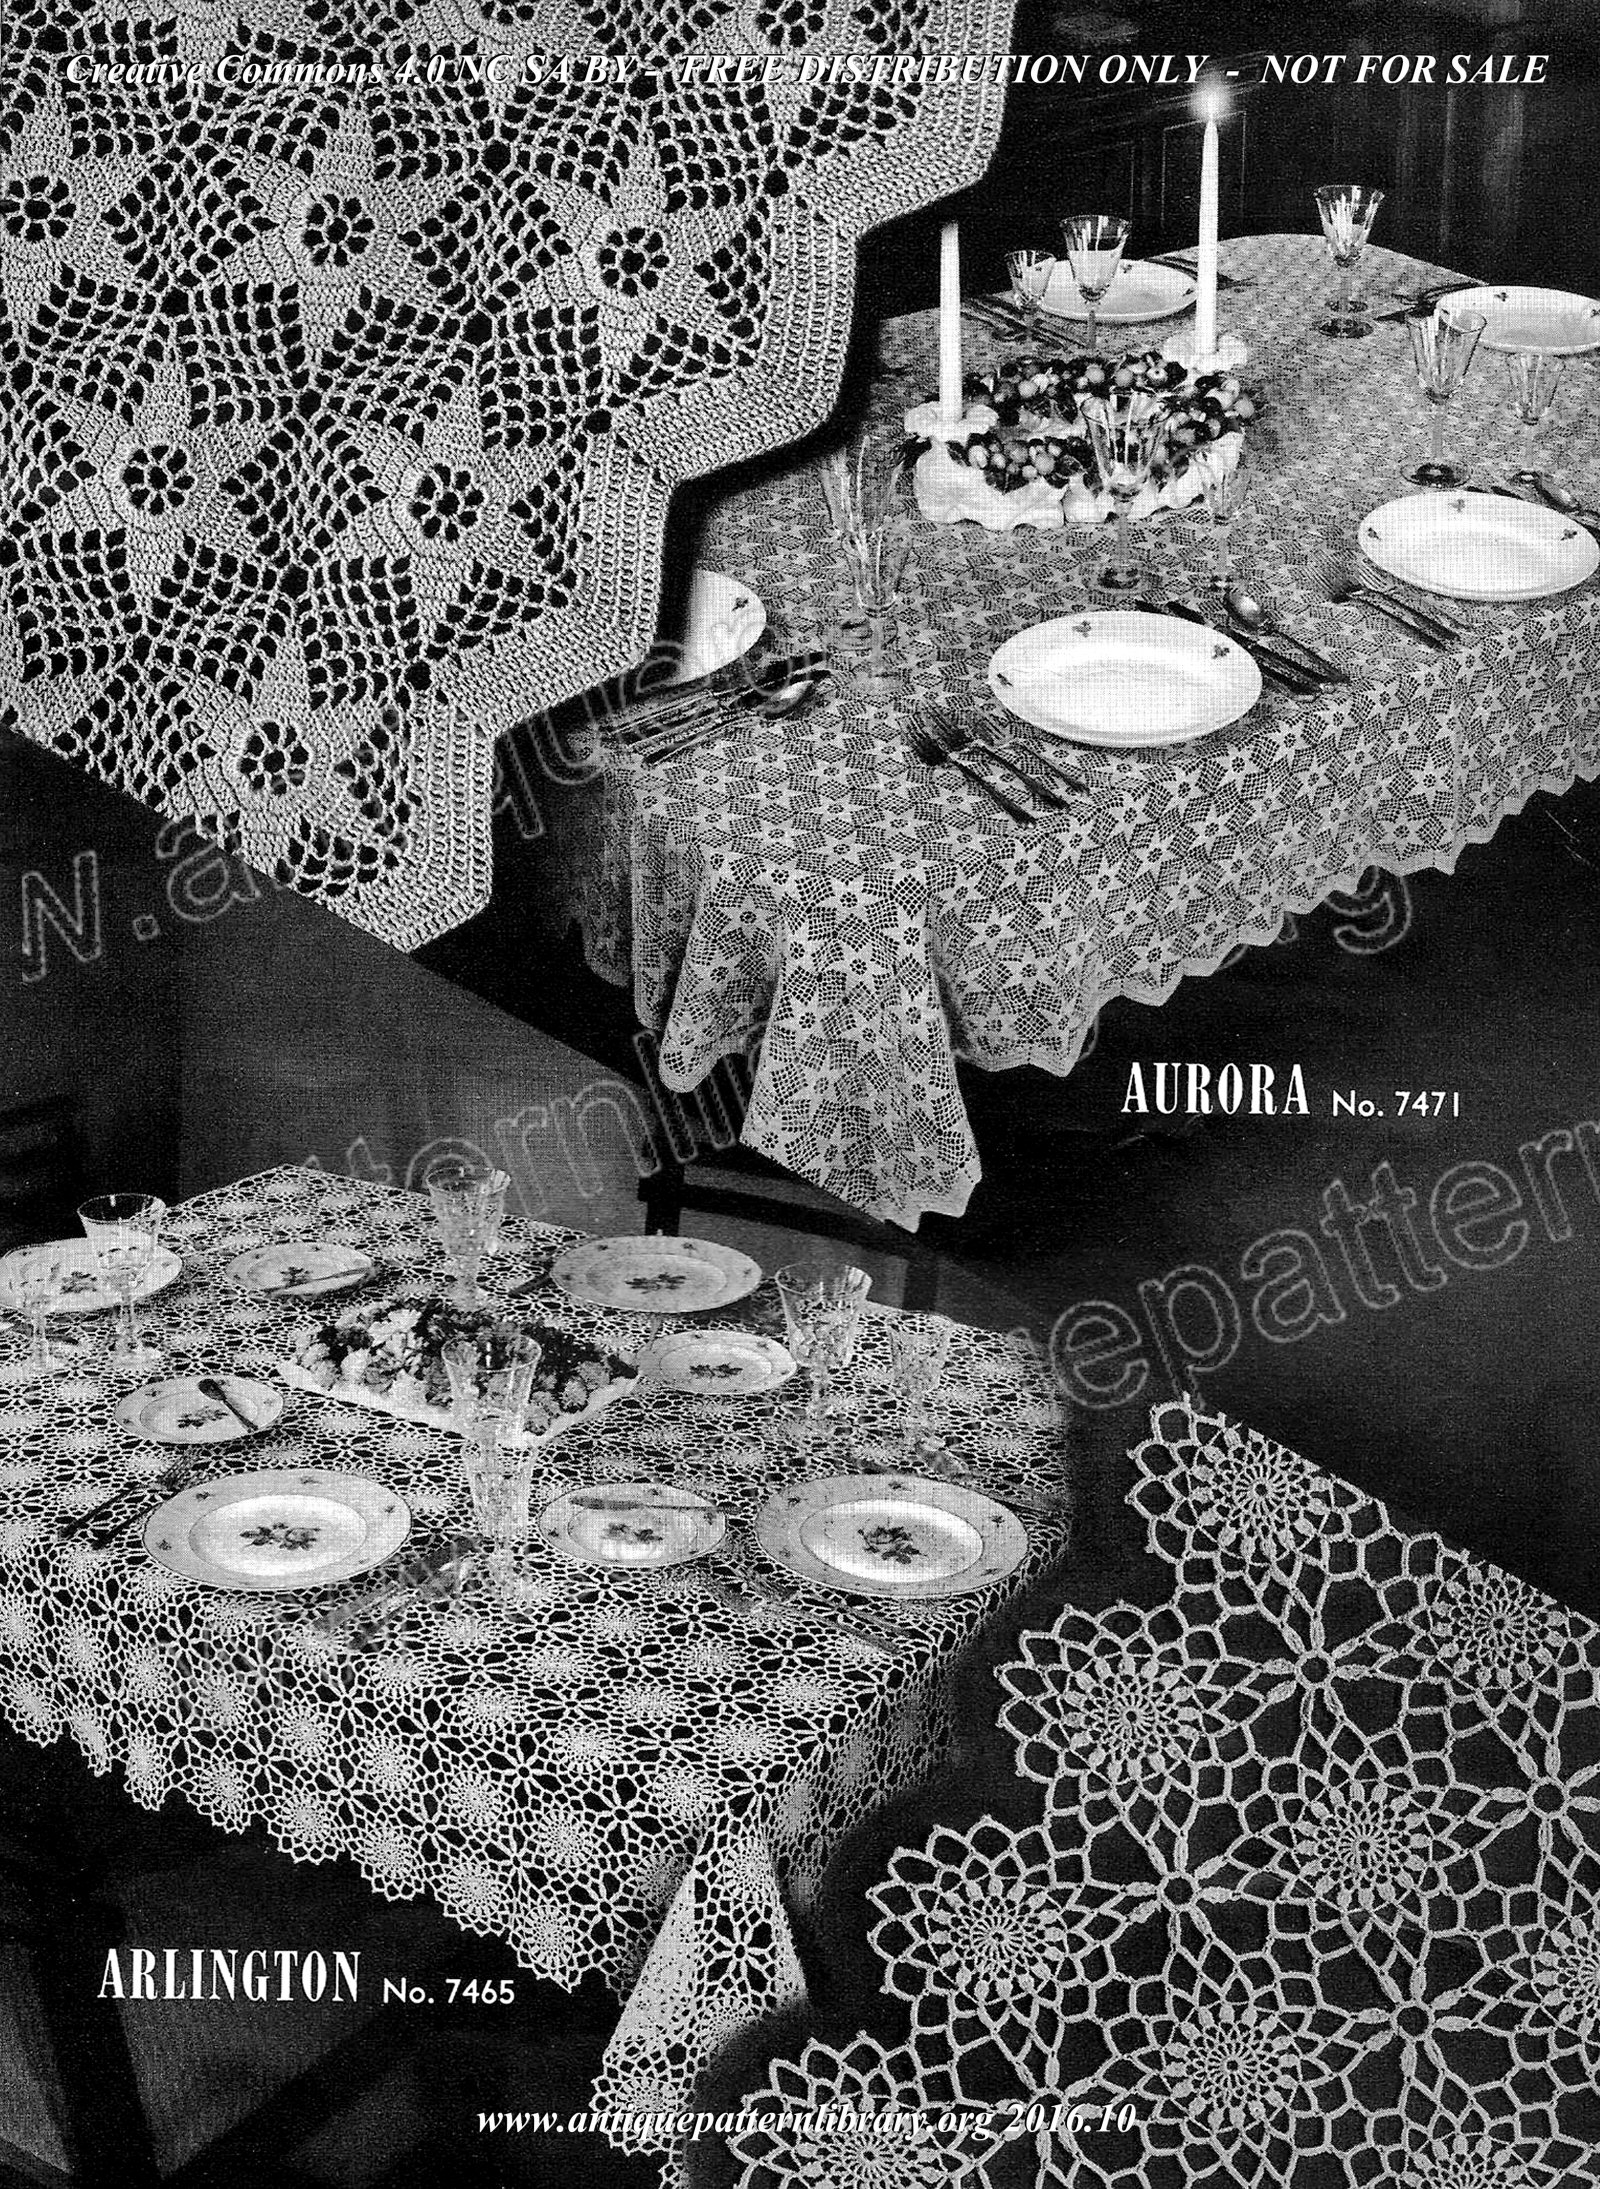 G-GH001 Crocheted Tablecloths and Luncheon Sets